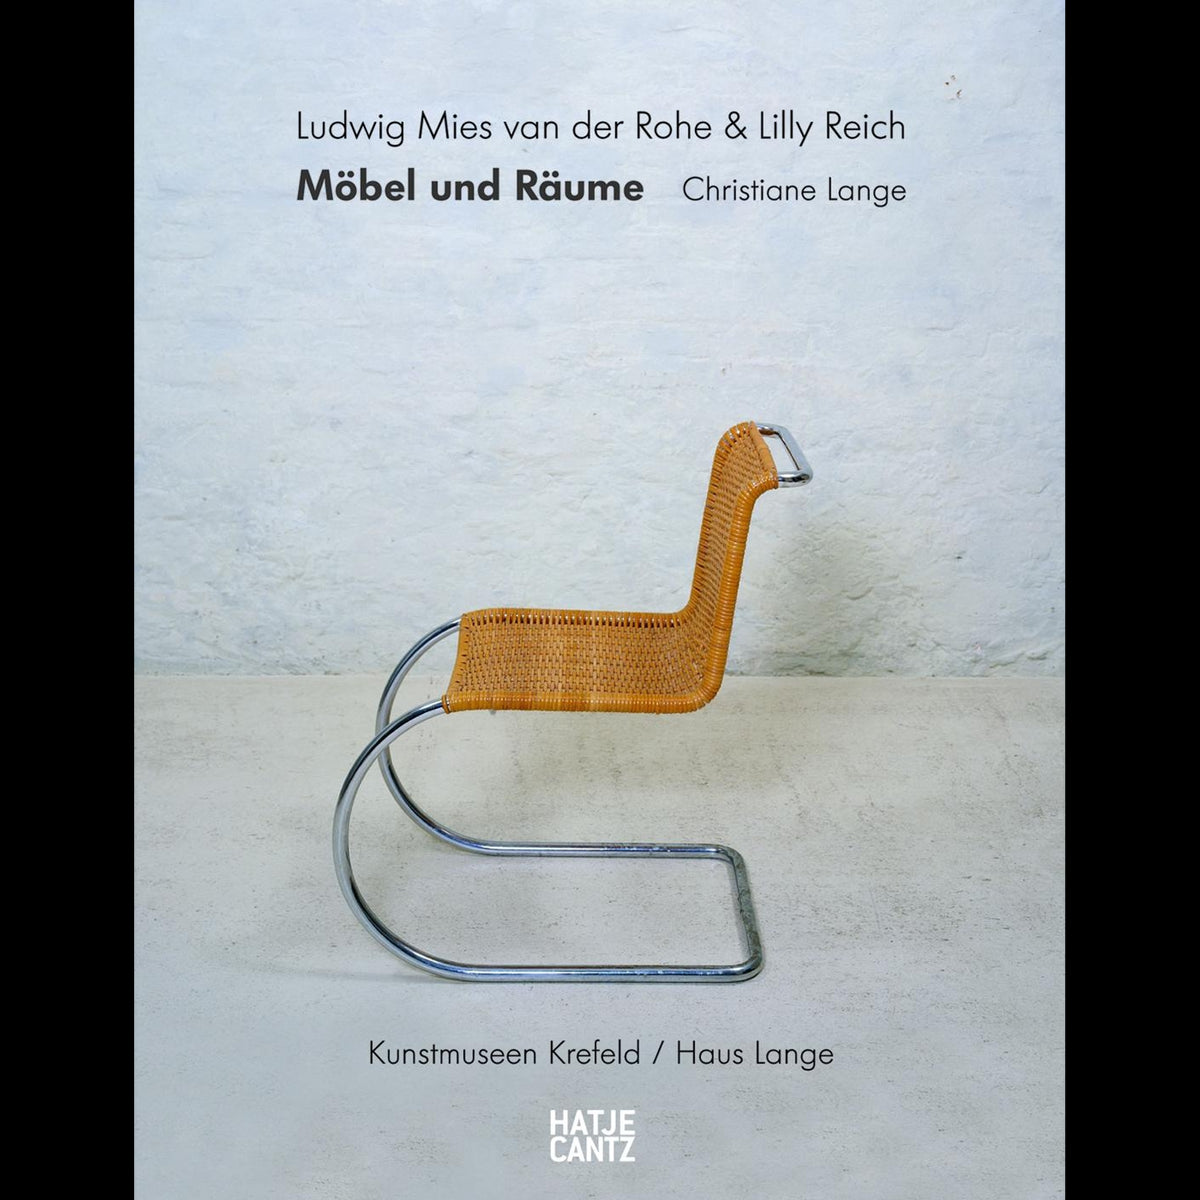 Coverbild Ludwig Mies van der Rohe & Lilly Reich